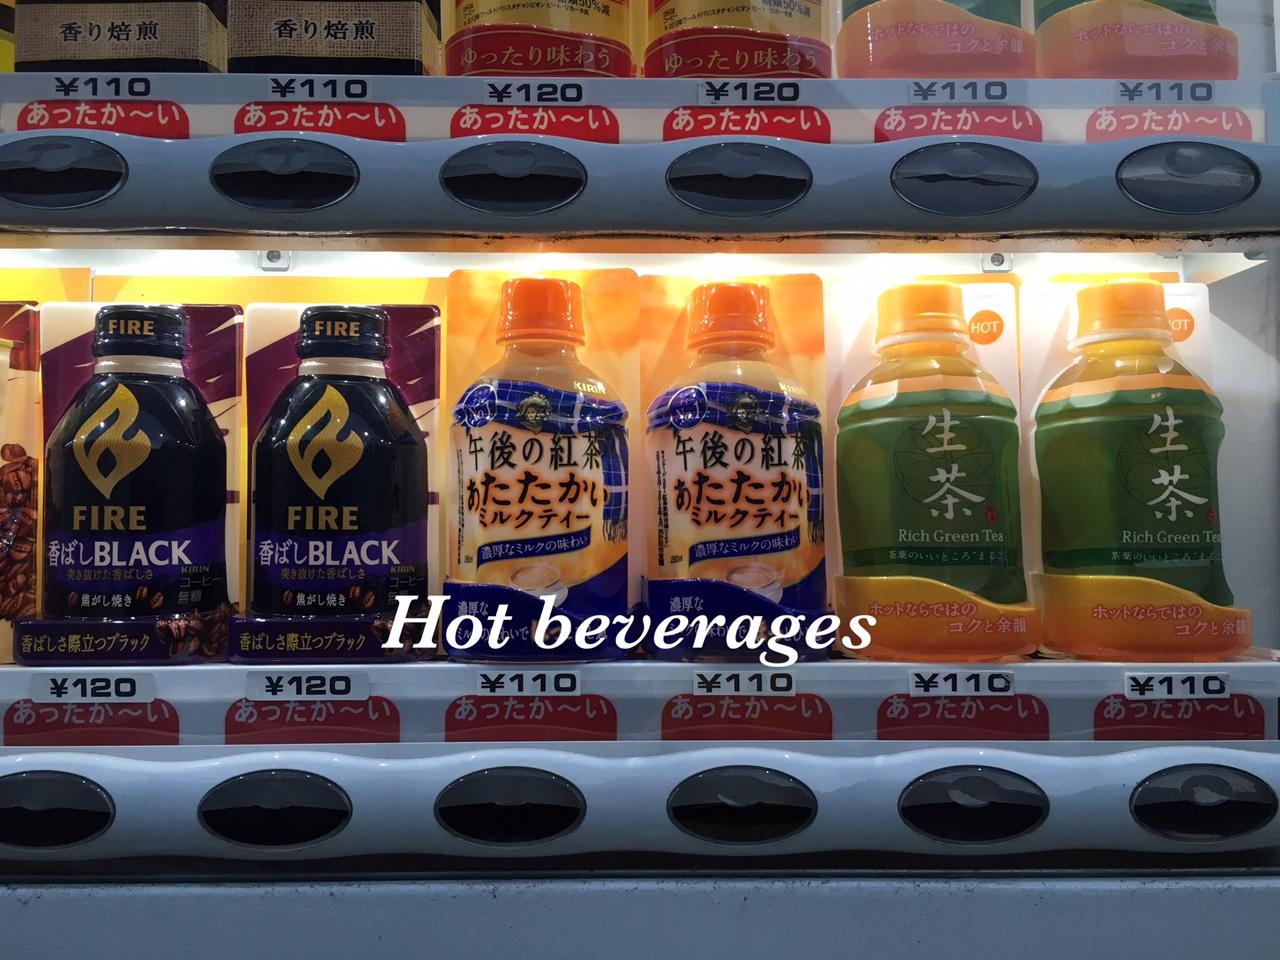 Buying hot beverages from Japanese vending machine